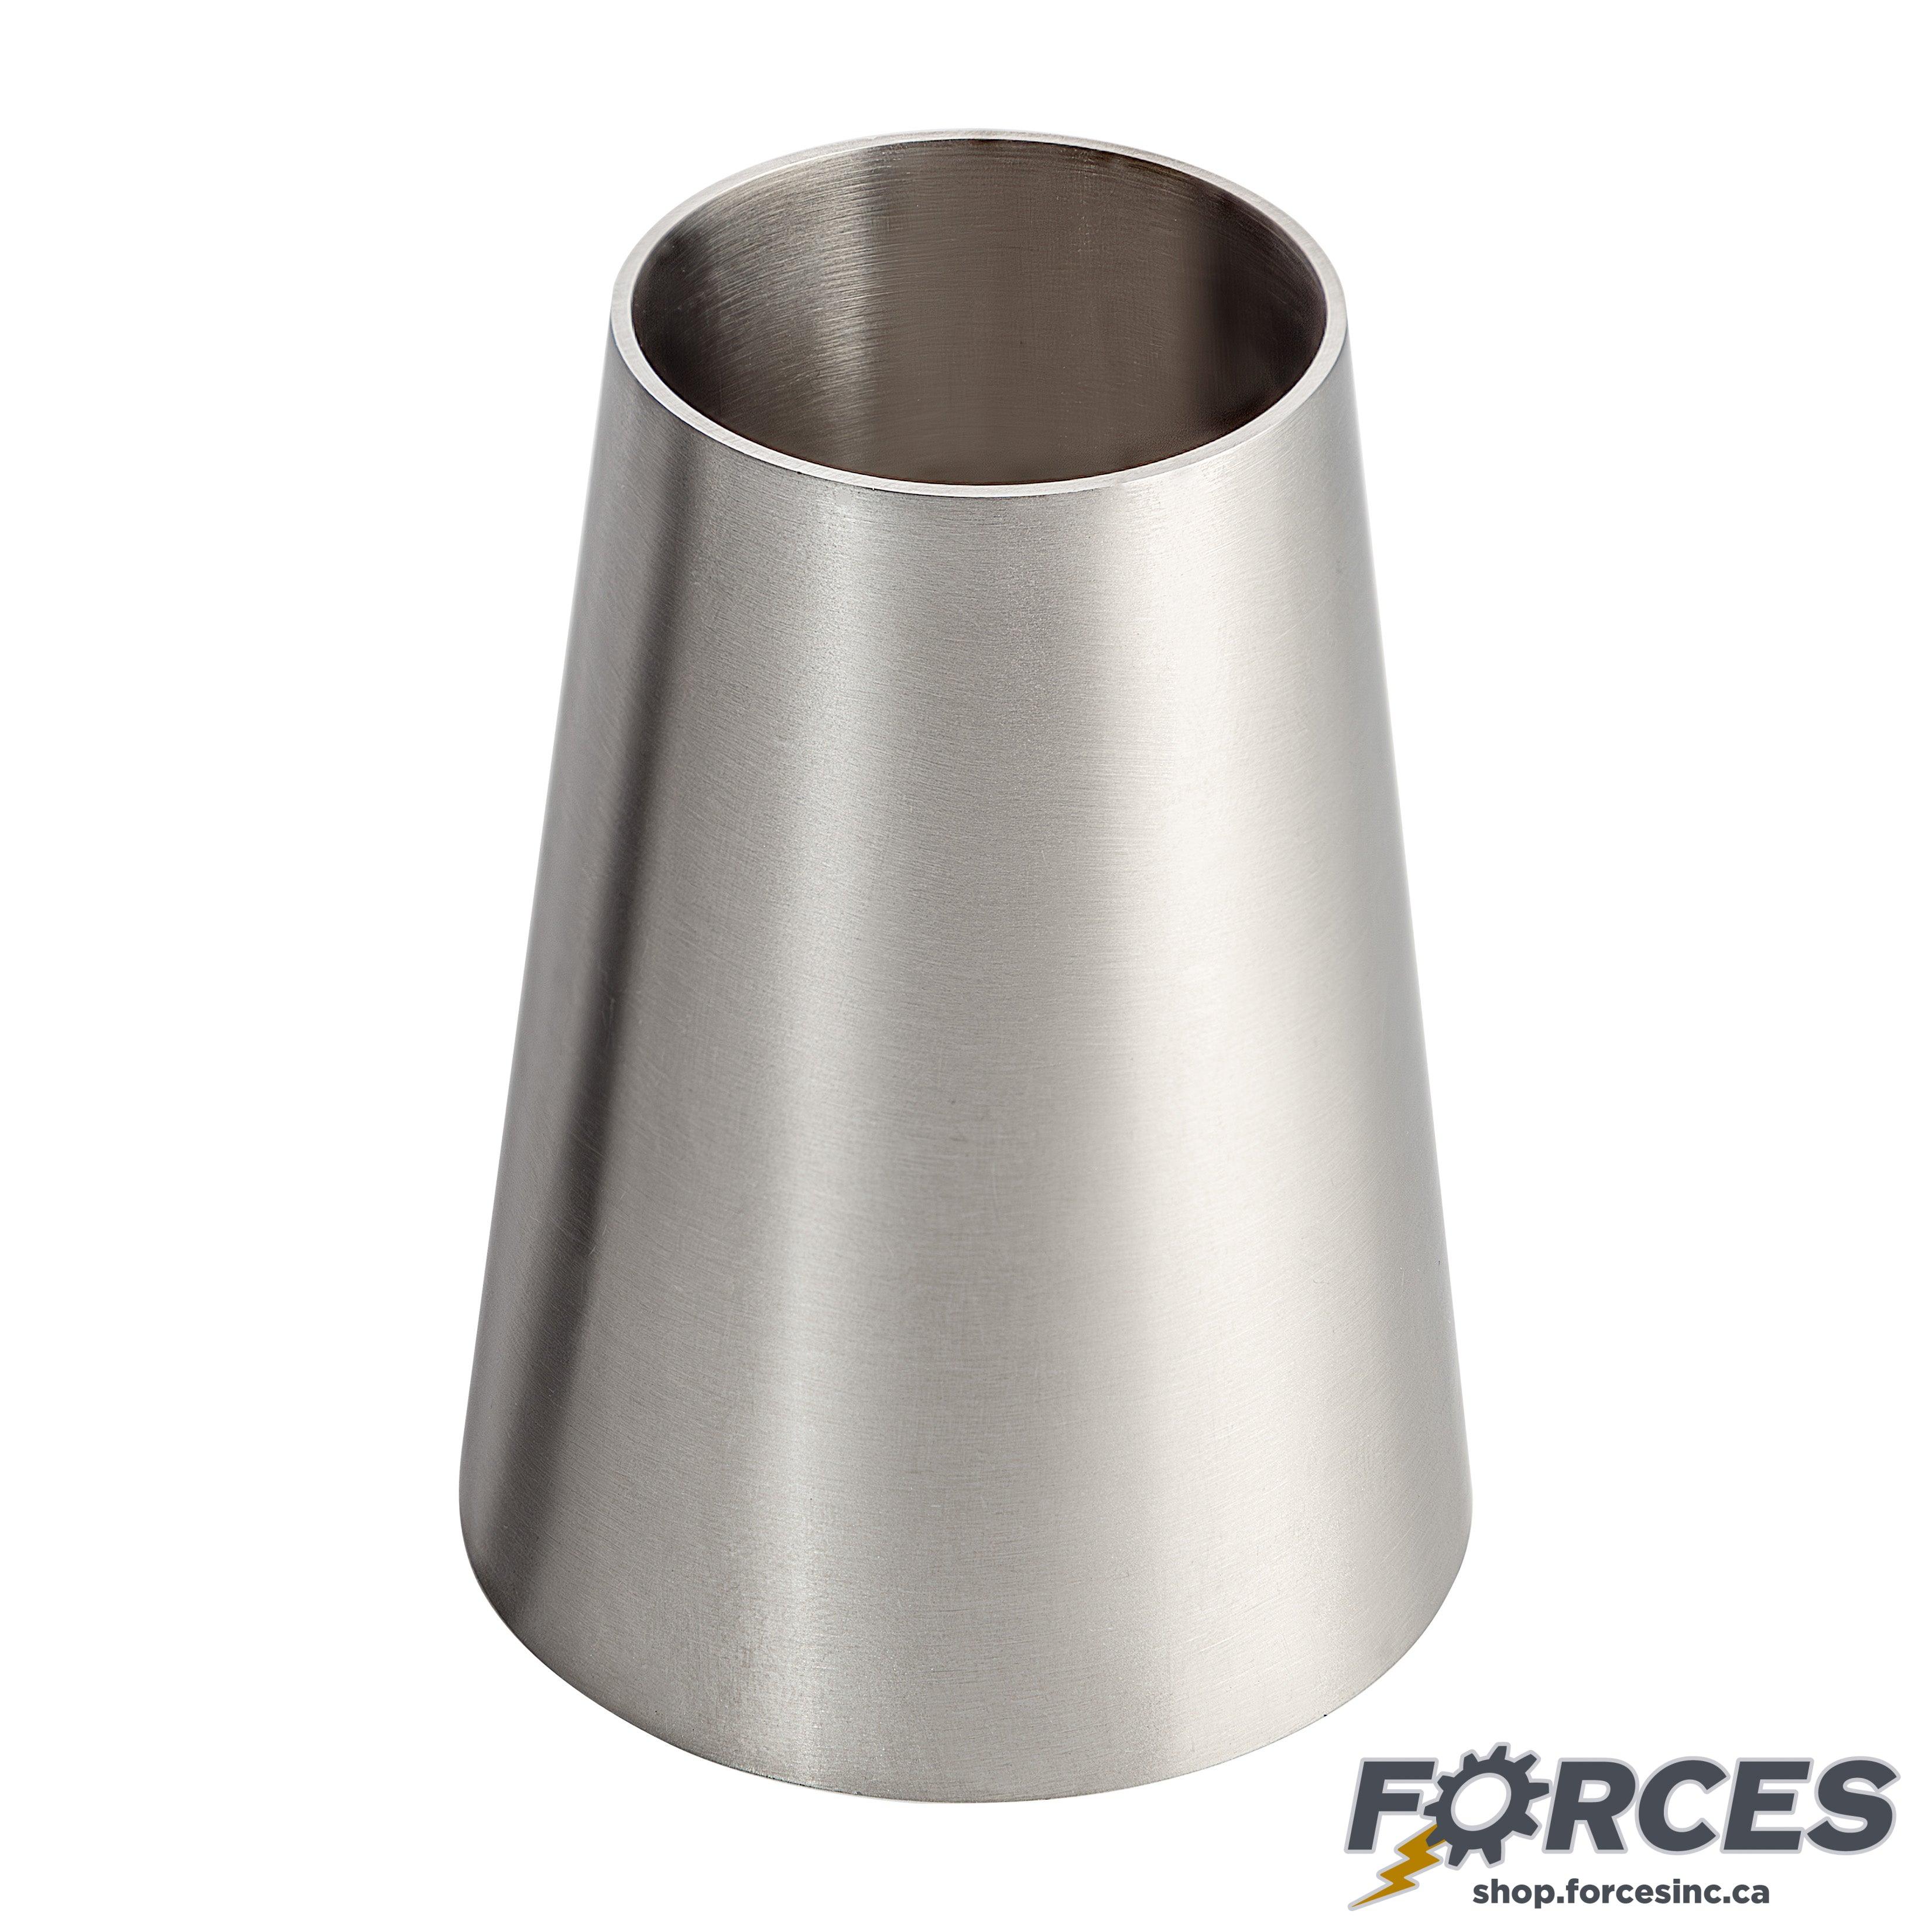 1-1/2" x 1/2" Butt Weld Concentric Reducer - Stainless Steel 316 - Forces Inc